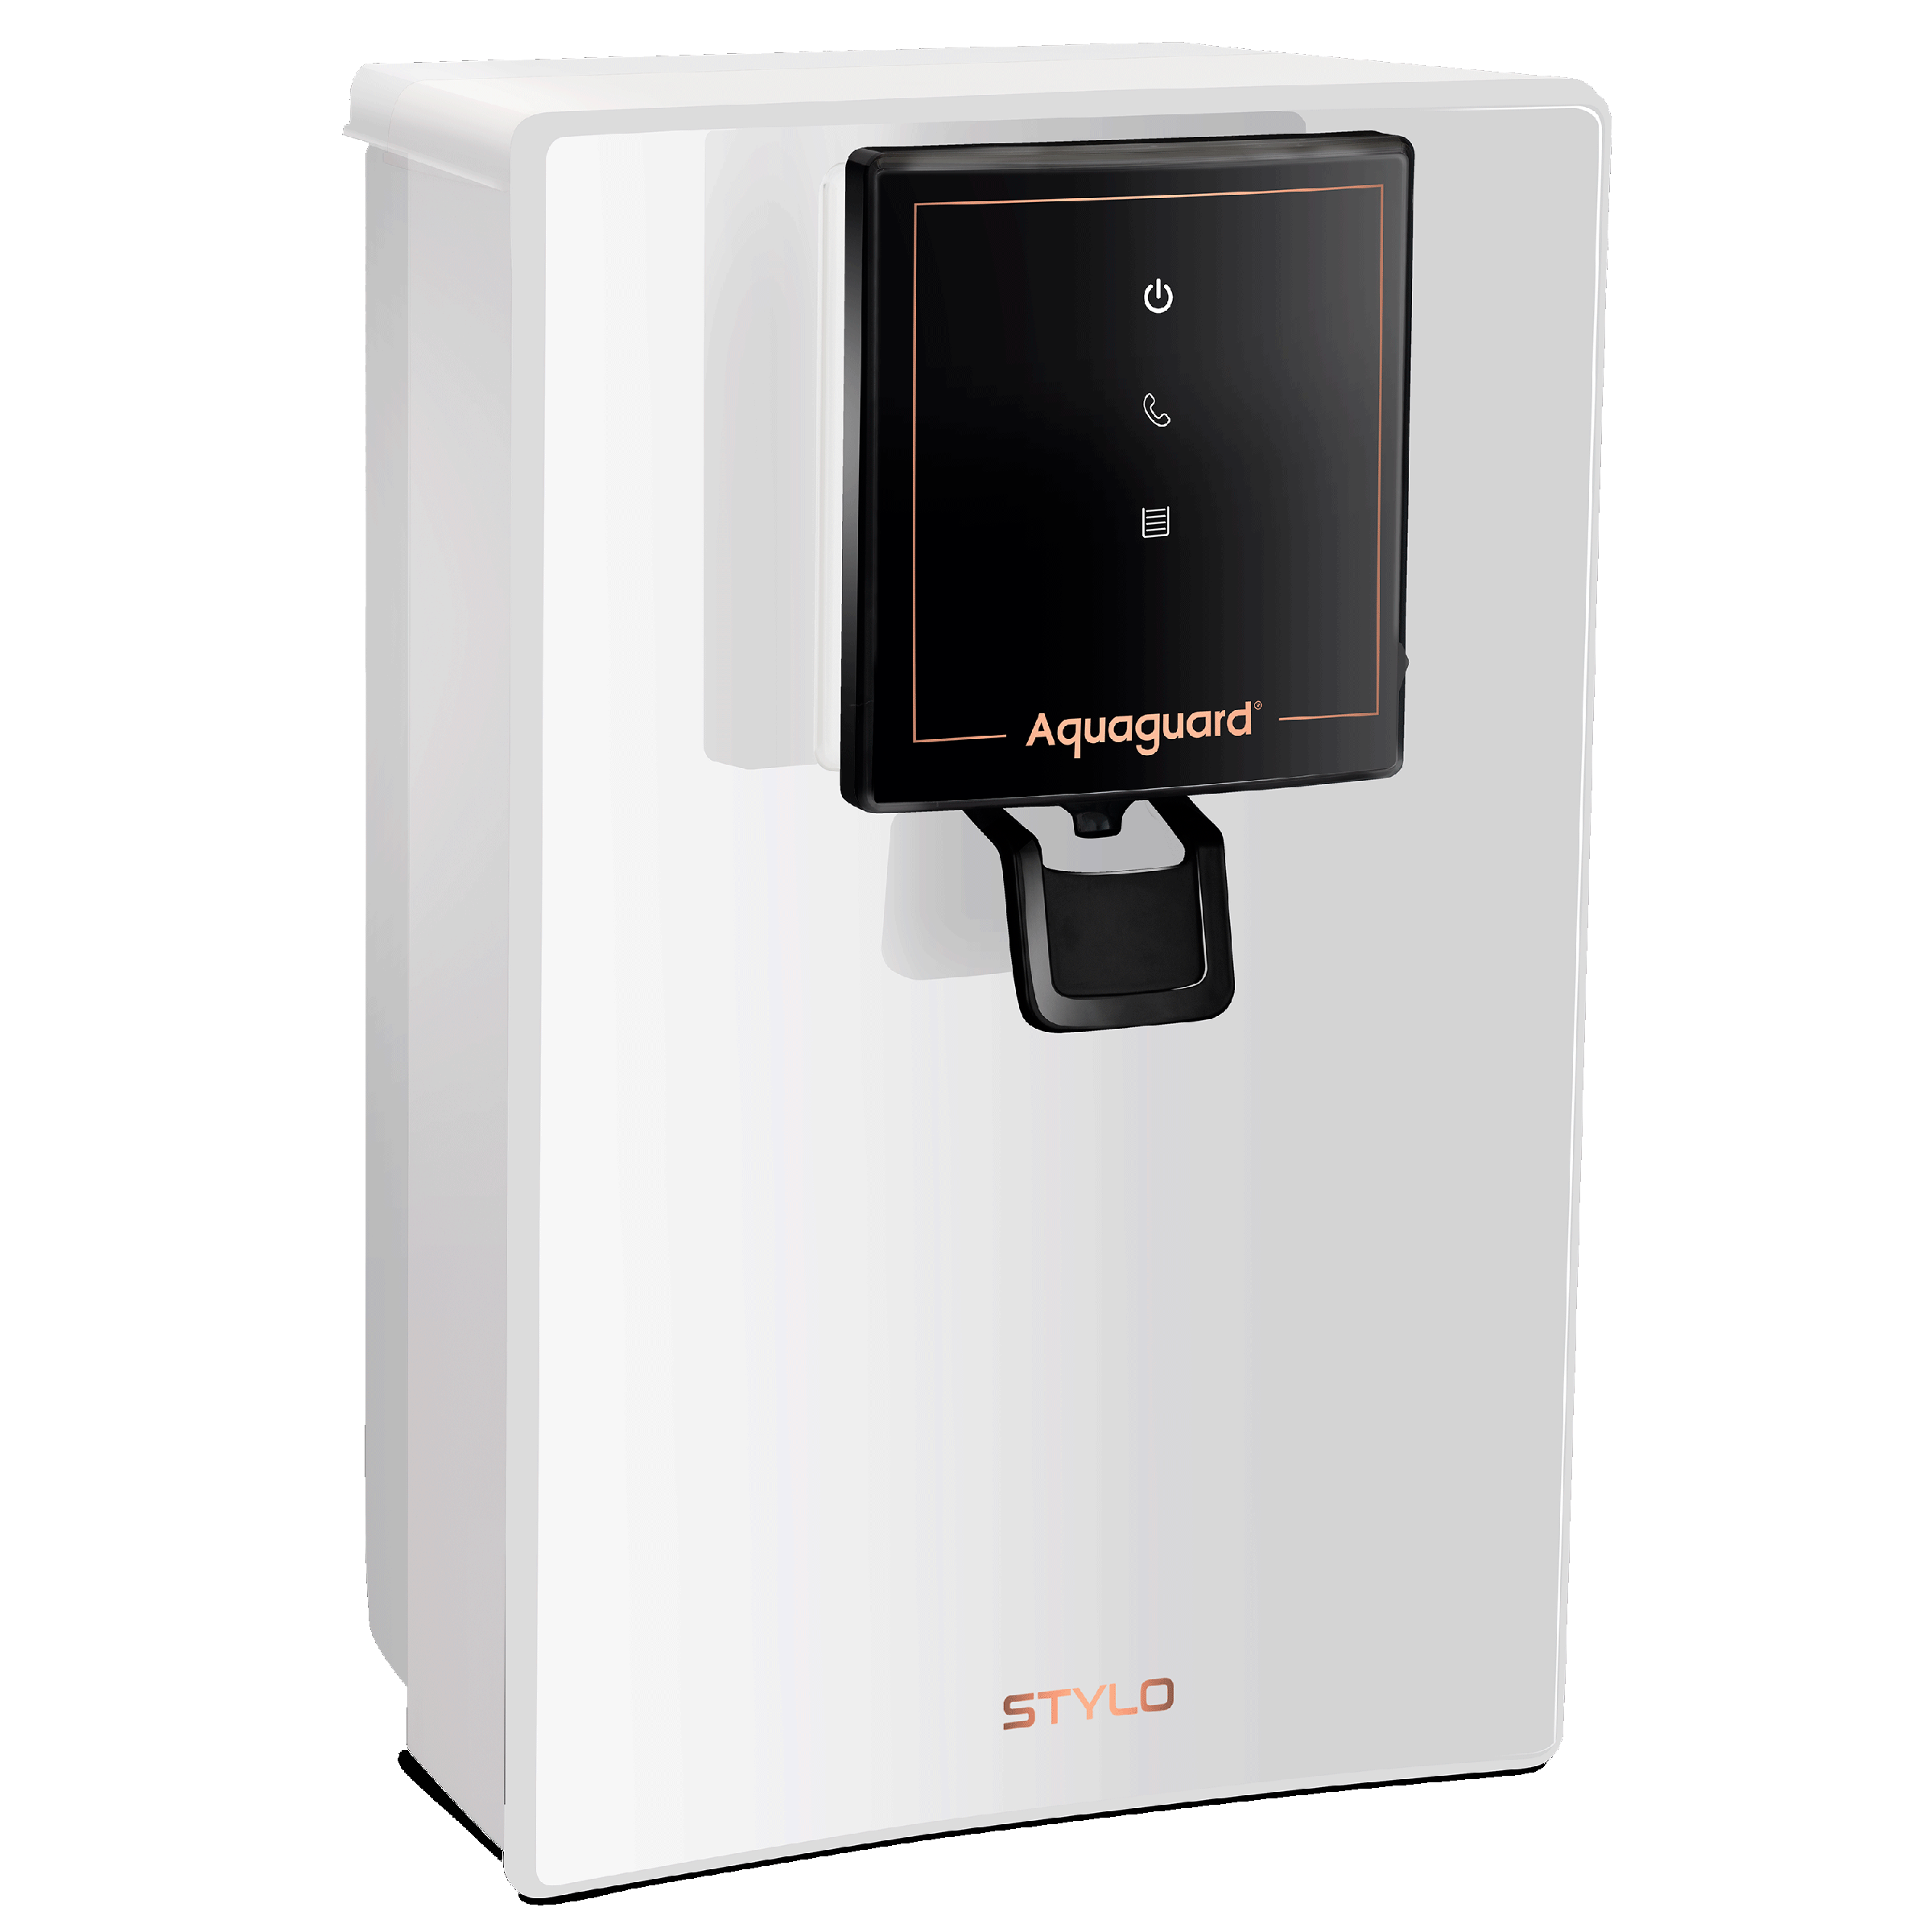 Aquaguard Stylo 6L RO + UV + MTDS Smart Water Purifier with Active Copper Zinc Booster Technology (White)